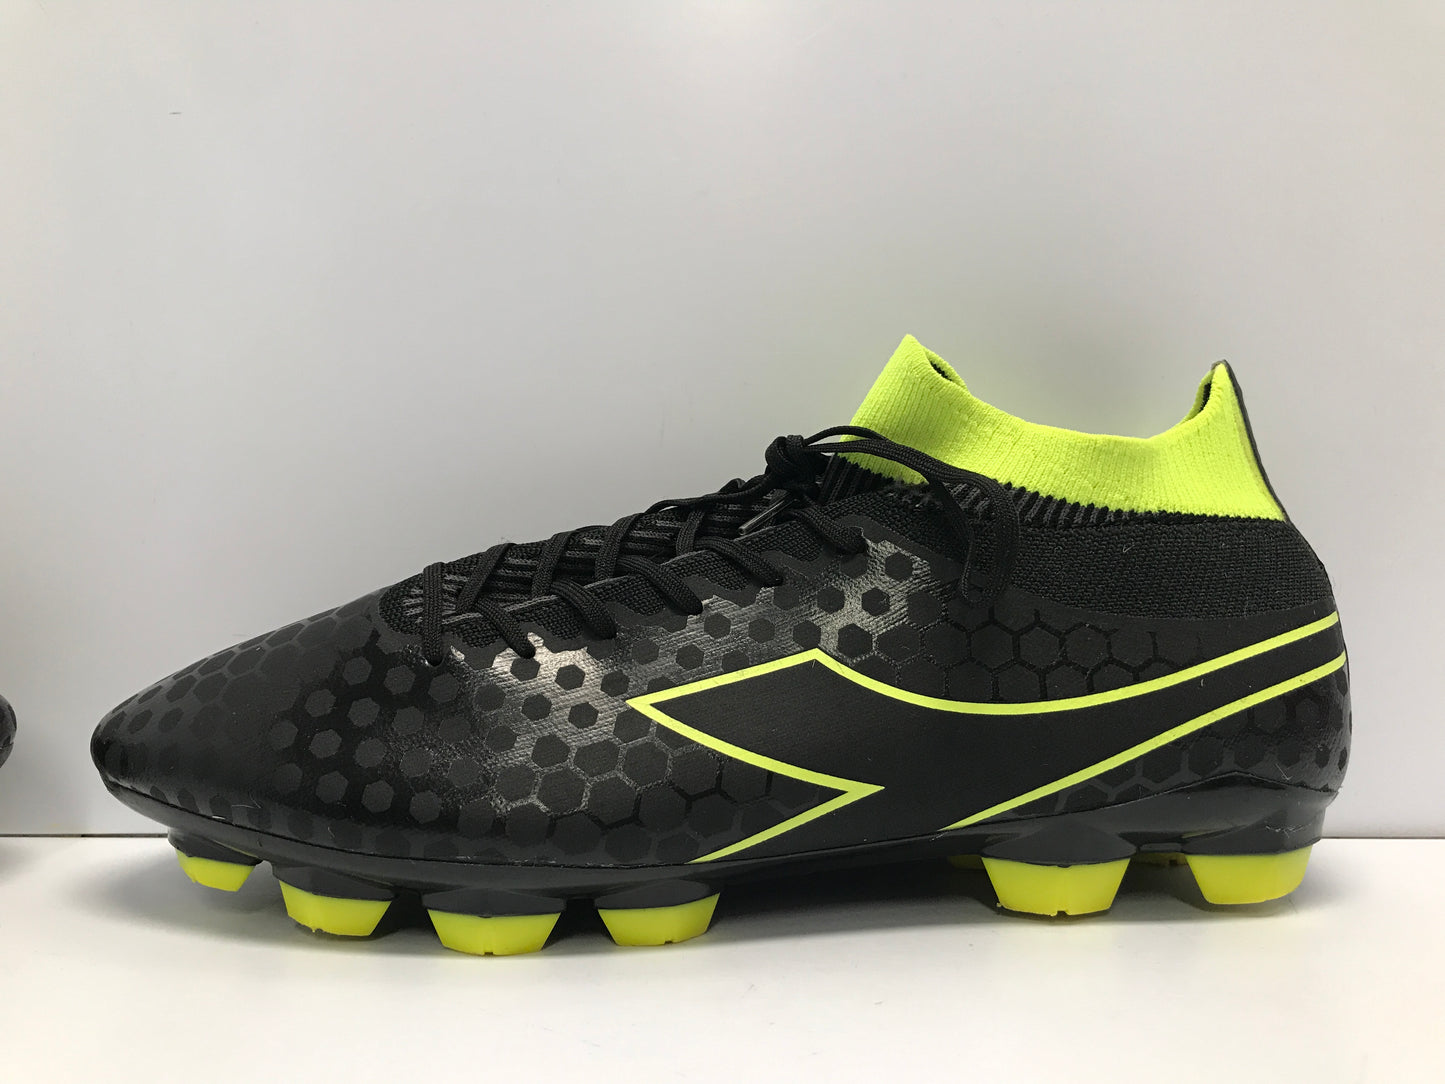 Football Rugby Soccer Shoes Cleats Men's Size 4.5 Diadora Slipper Feet Lime Black Like New